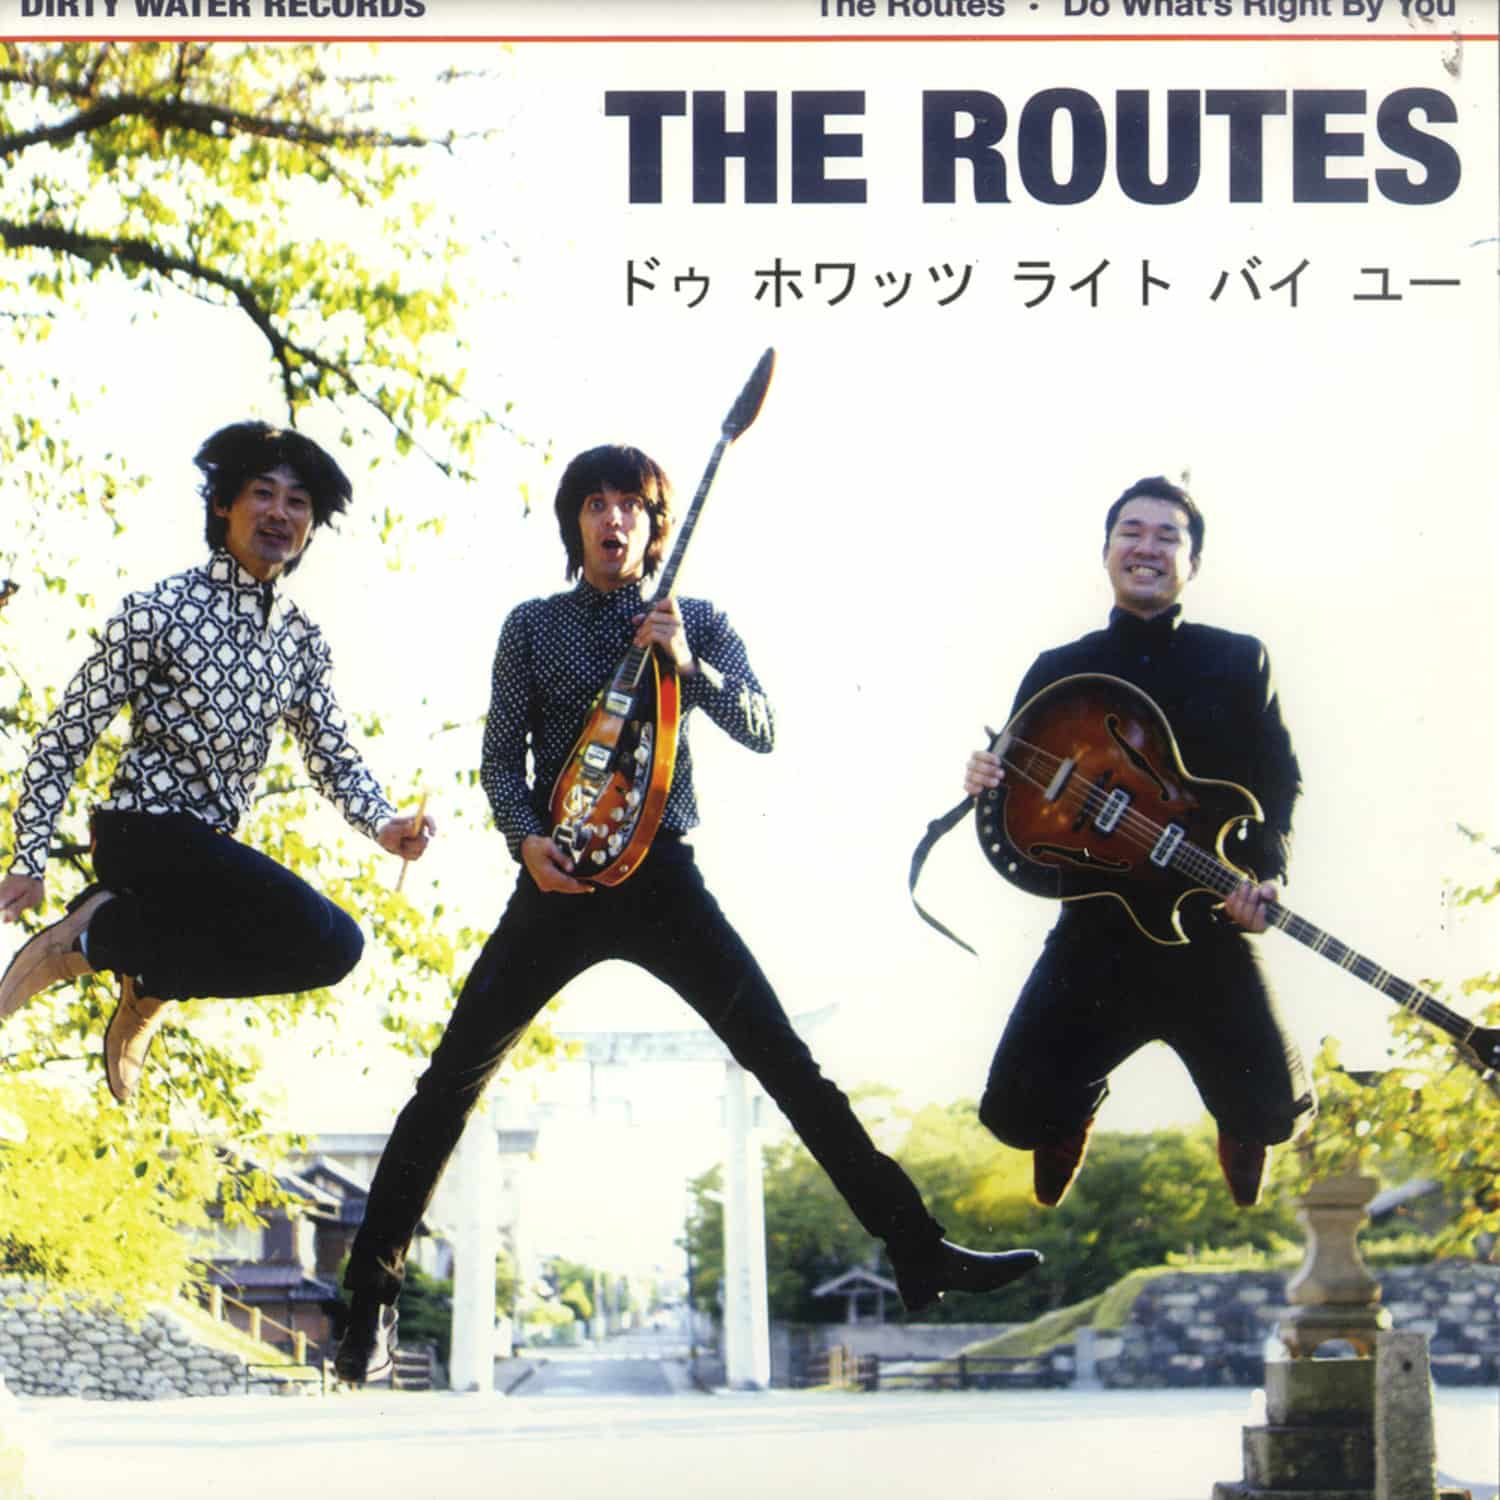 Routes - DO WHAT S RIGHT BY YOU 